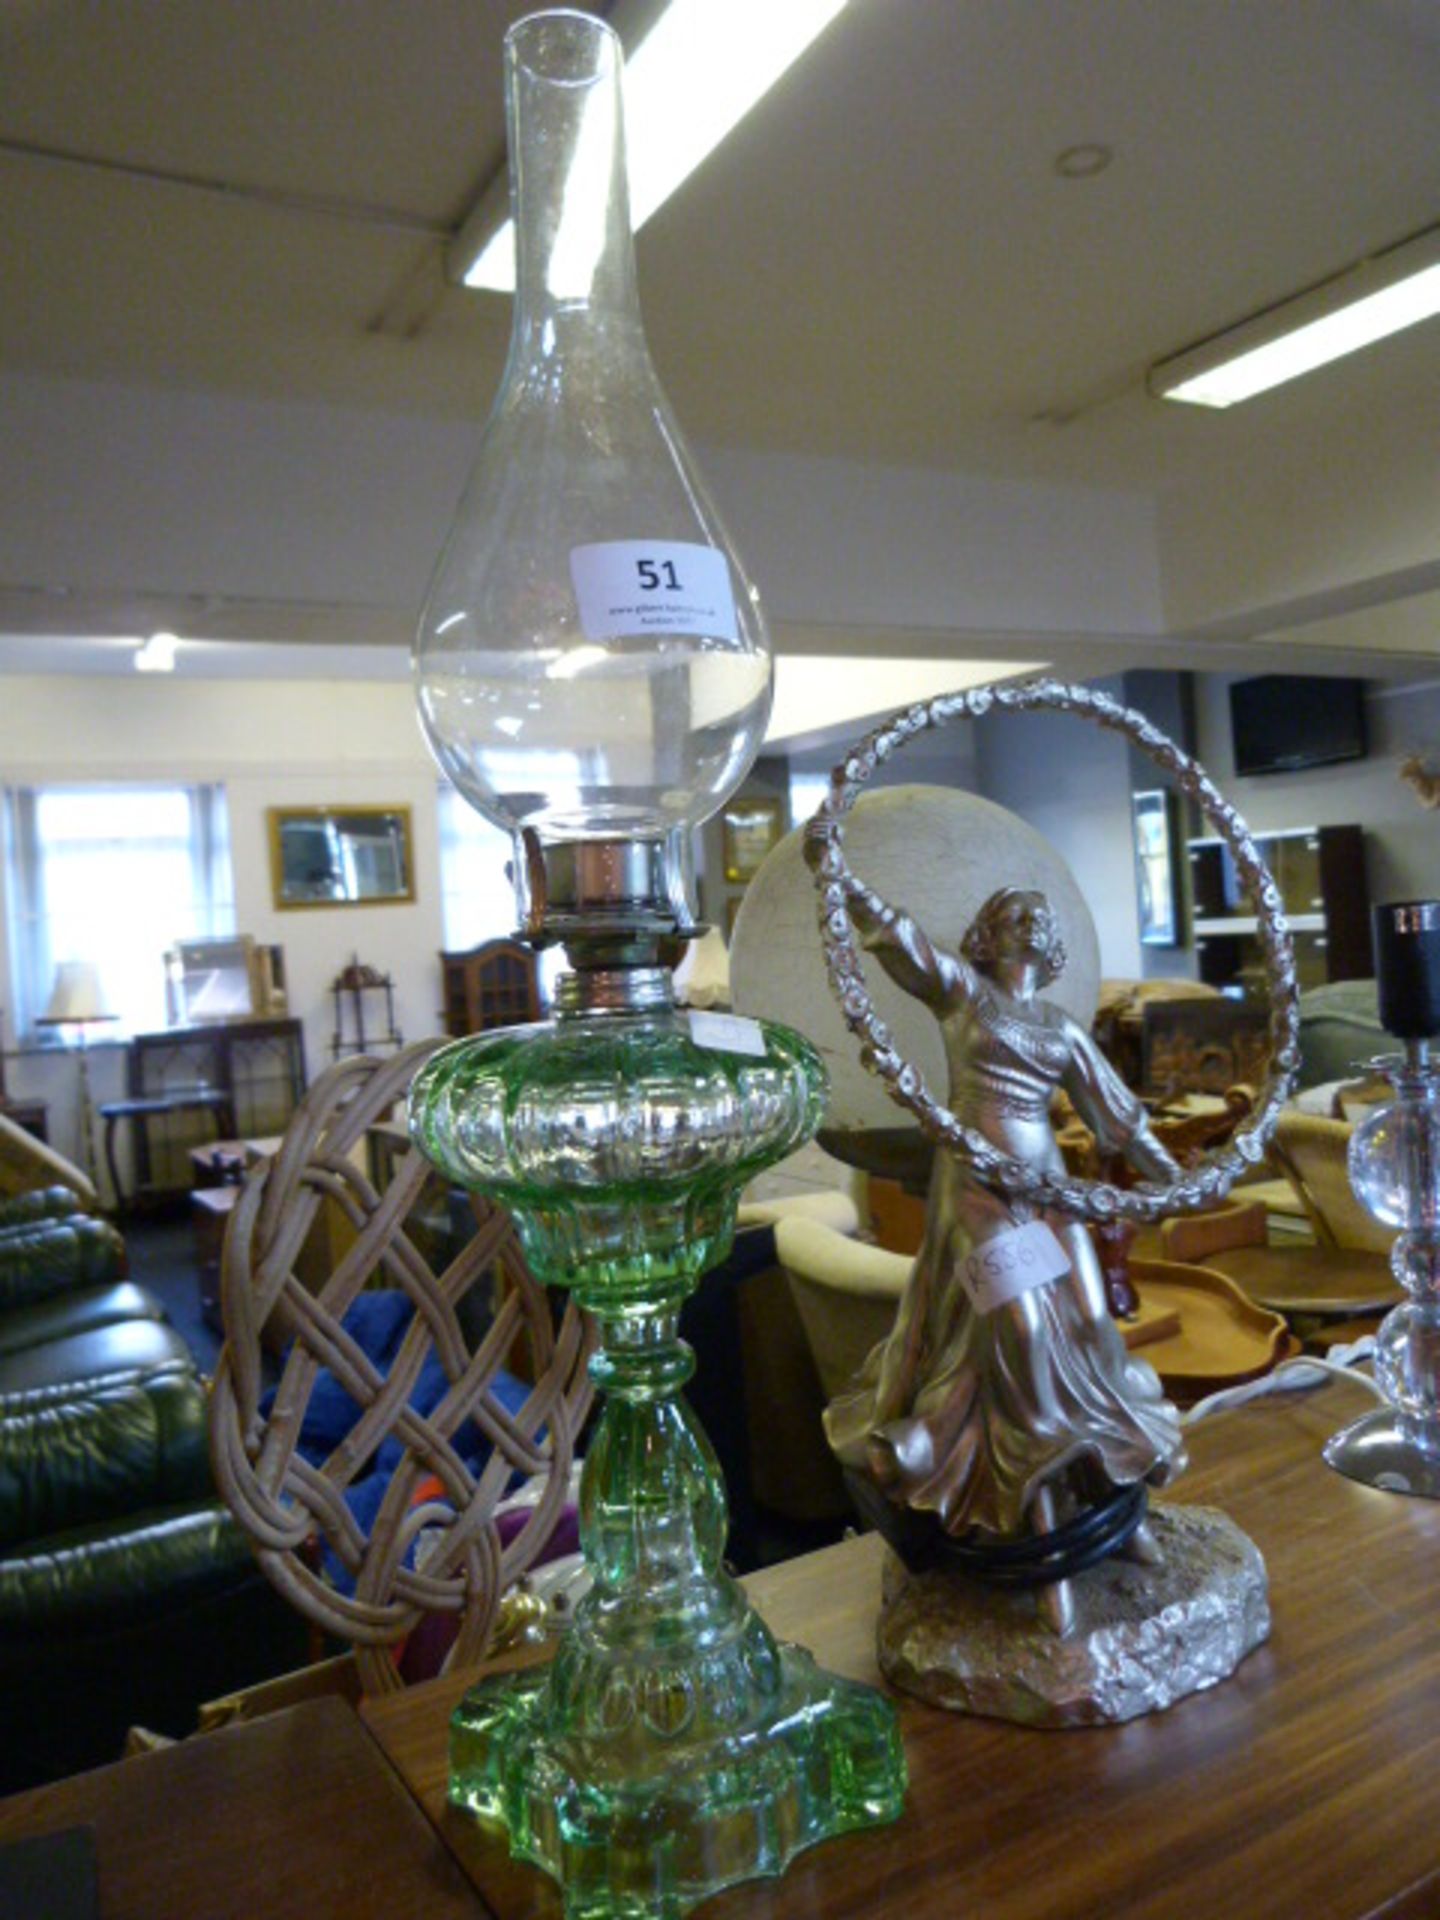 Art Deco Style Lamp and a Decorative Oil Lamp